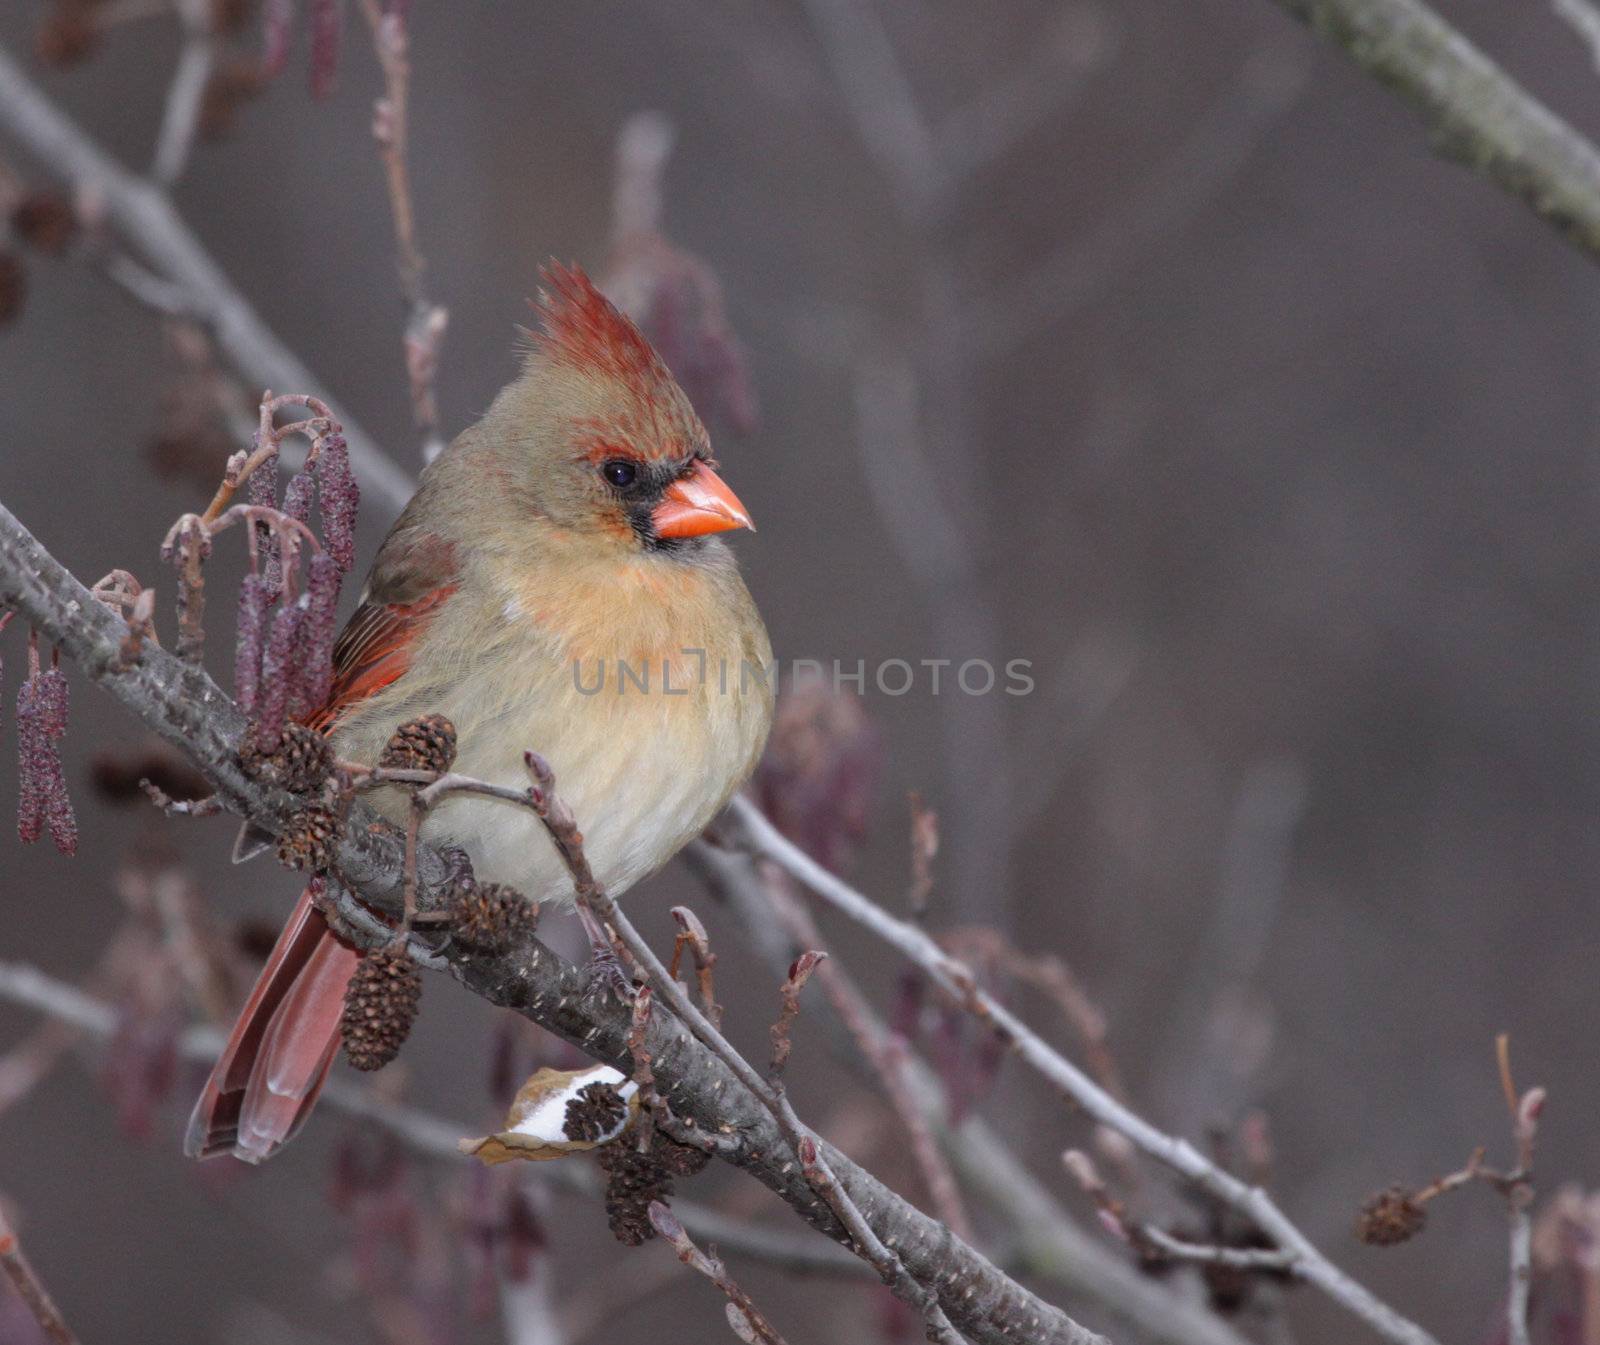 A female Northern Cardinal (Cardinalis cardinalis) sitting in a tree, in winter.  Shot in Southern Ontario, Canada.
